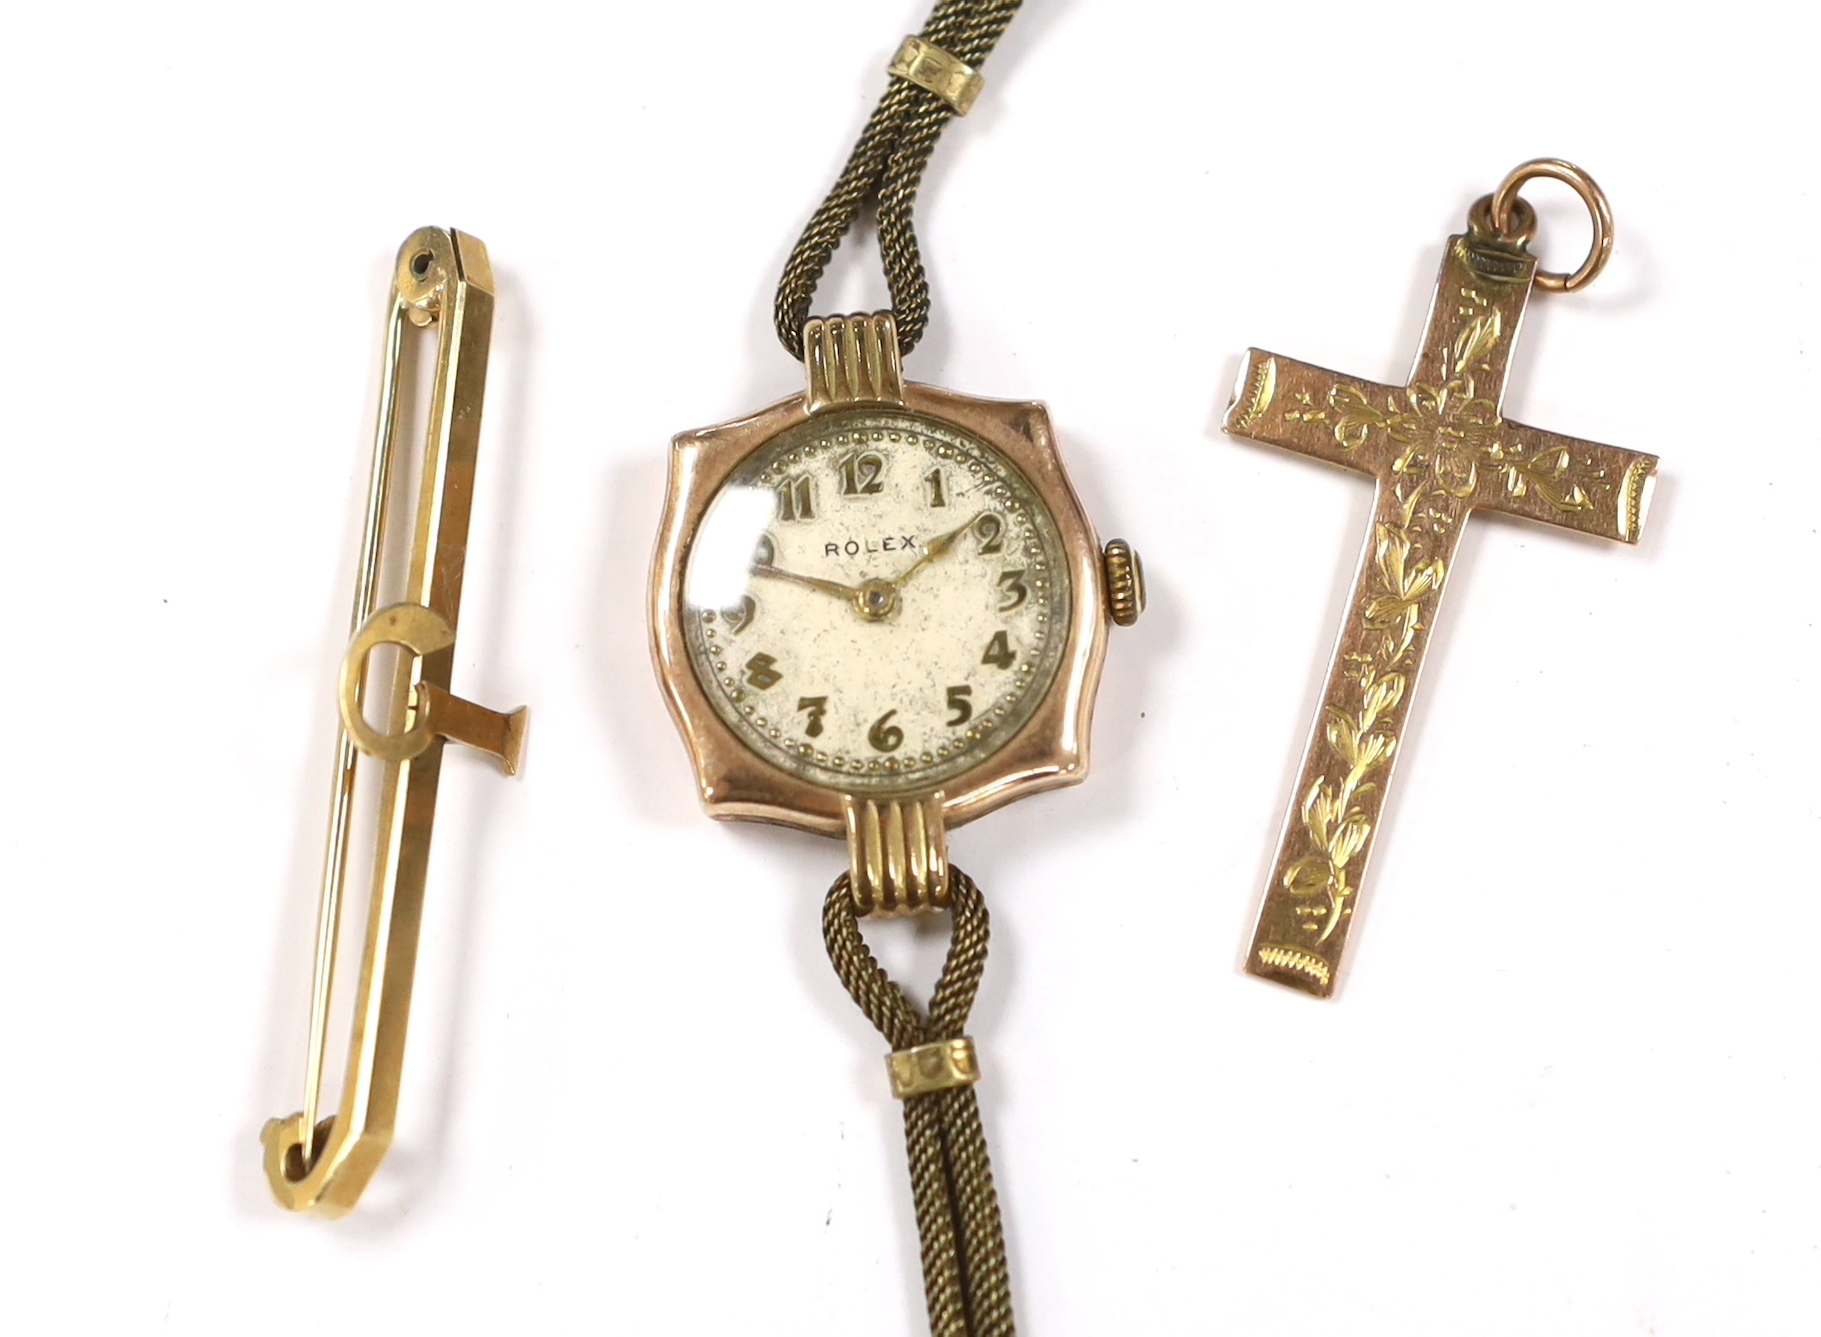 A lady's yellow metal manual wind wrist watch, the dial inscribed 'Rolex', a 9ct gold cross pendant and a 9ct bar brooch.